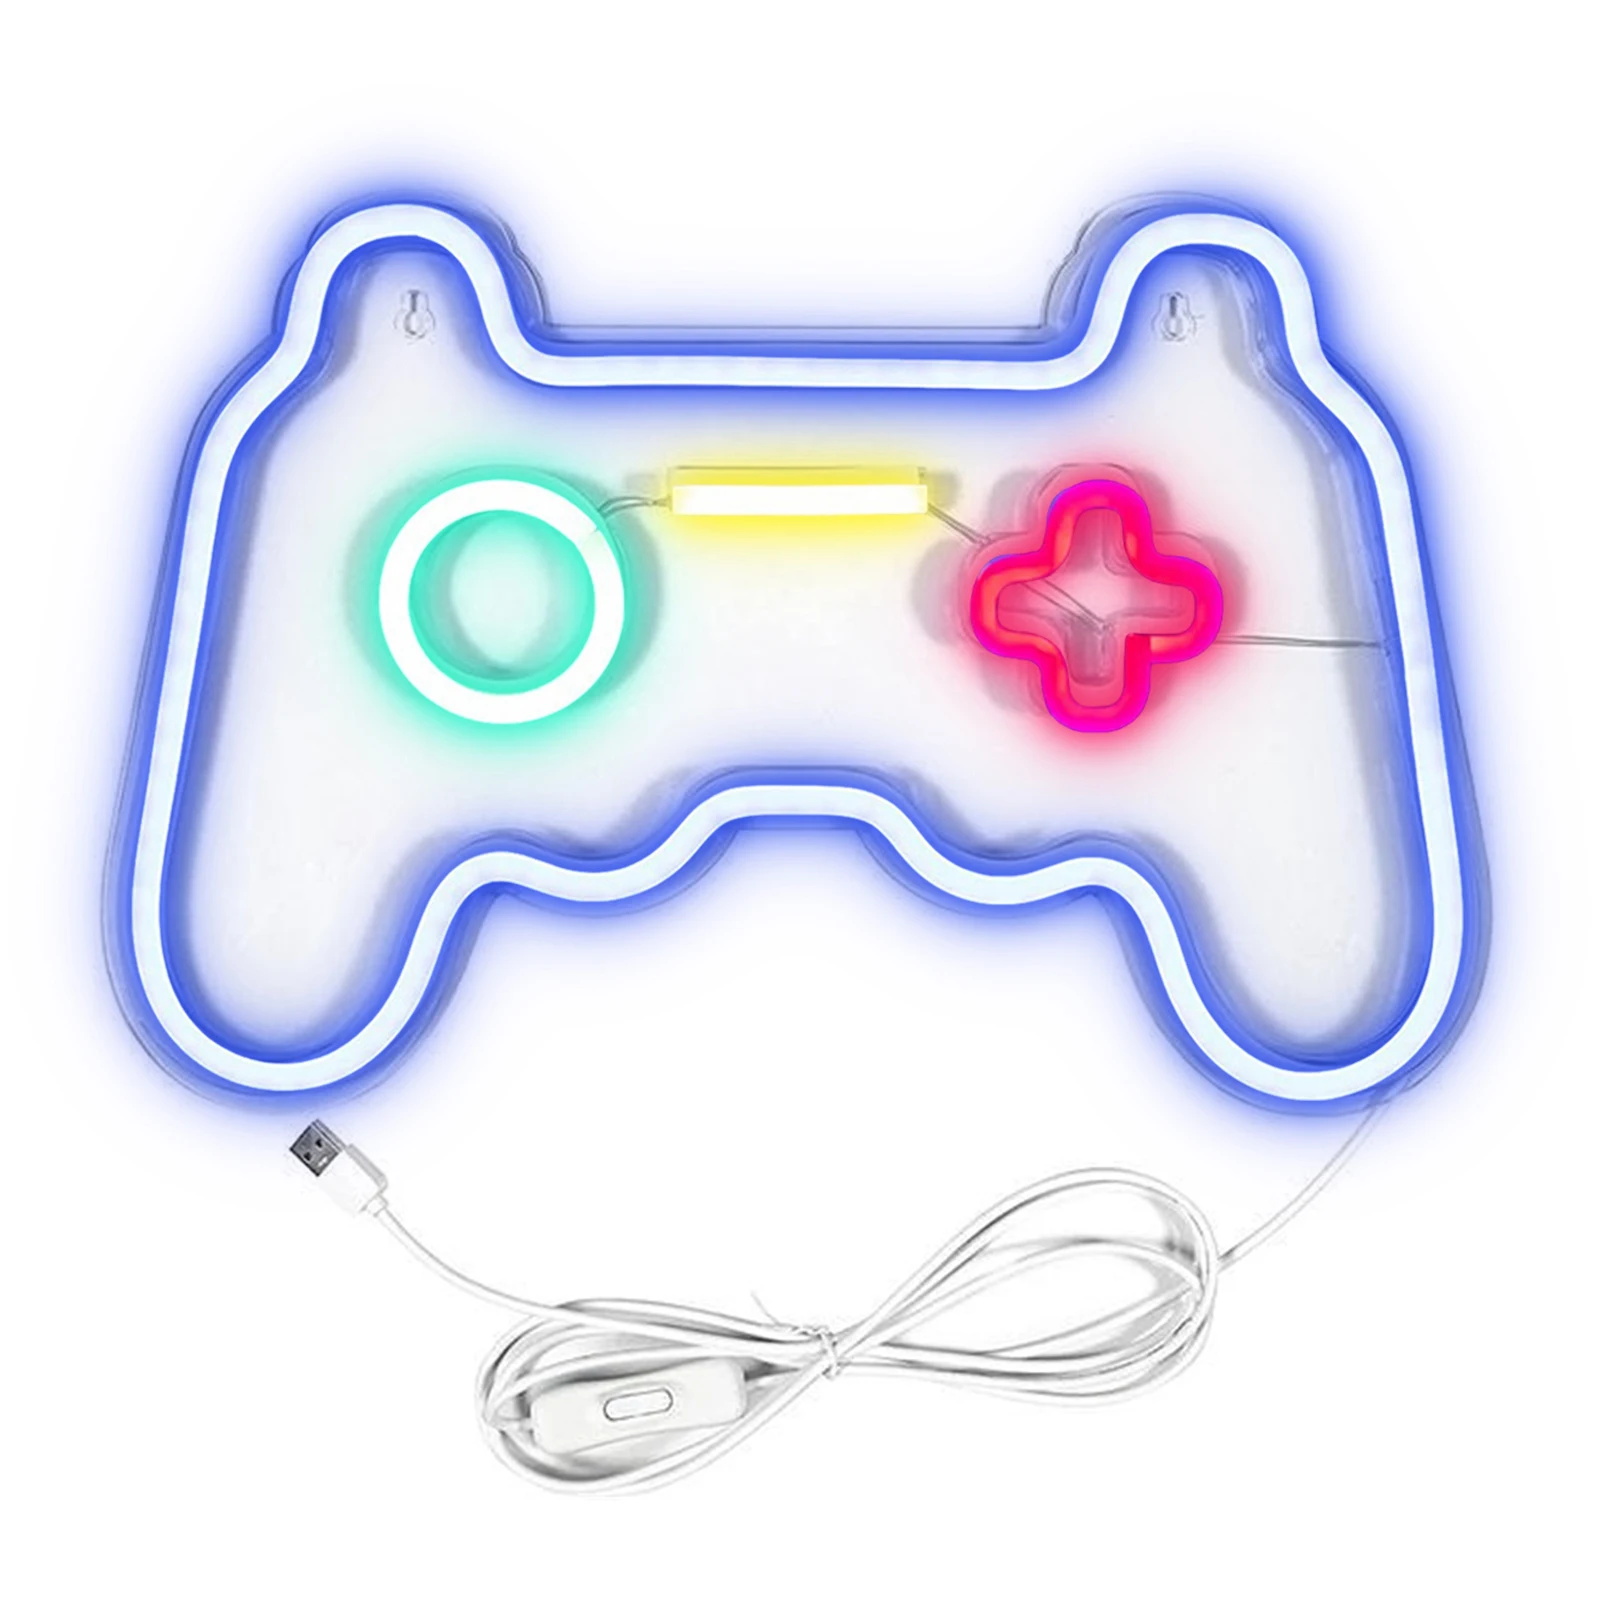 LED Game Neon Sign Gamepad Shape Neon Signs Decorative Lights USB Powered Led Wall Light For Home Bar Man Cave Party Ornament Bo